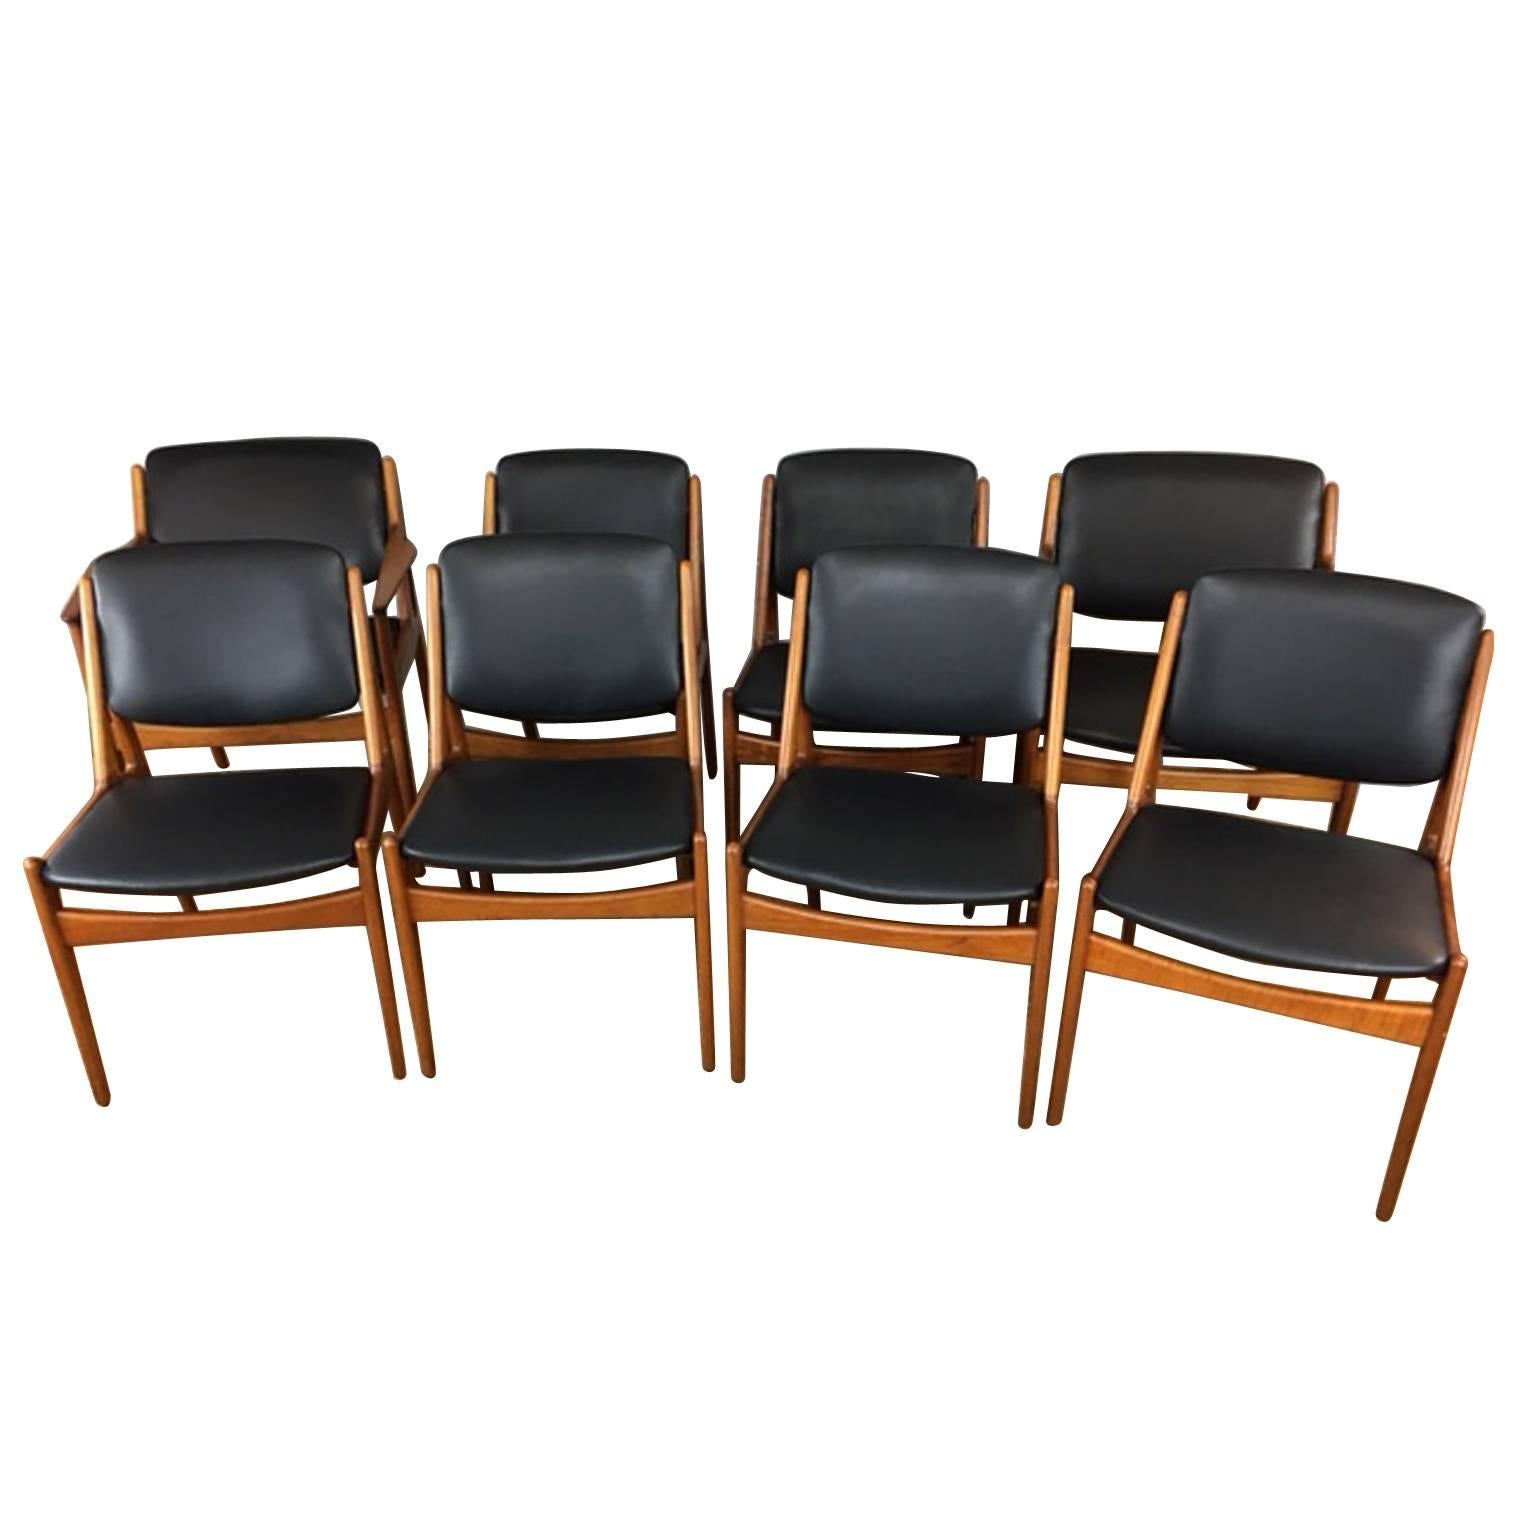 Arne Vodder Tilt Back Dining Chairs, Six Armless and Two Captains